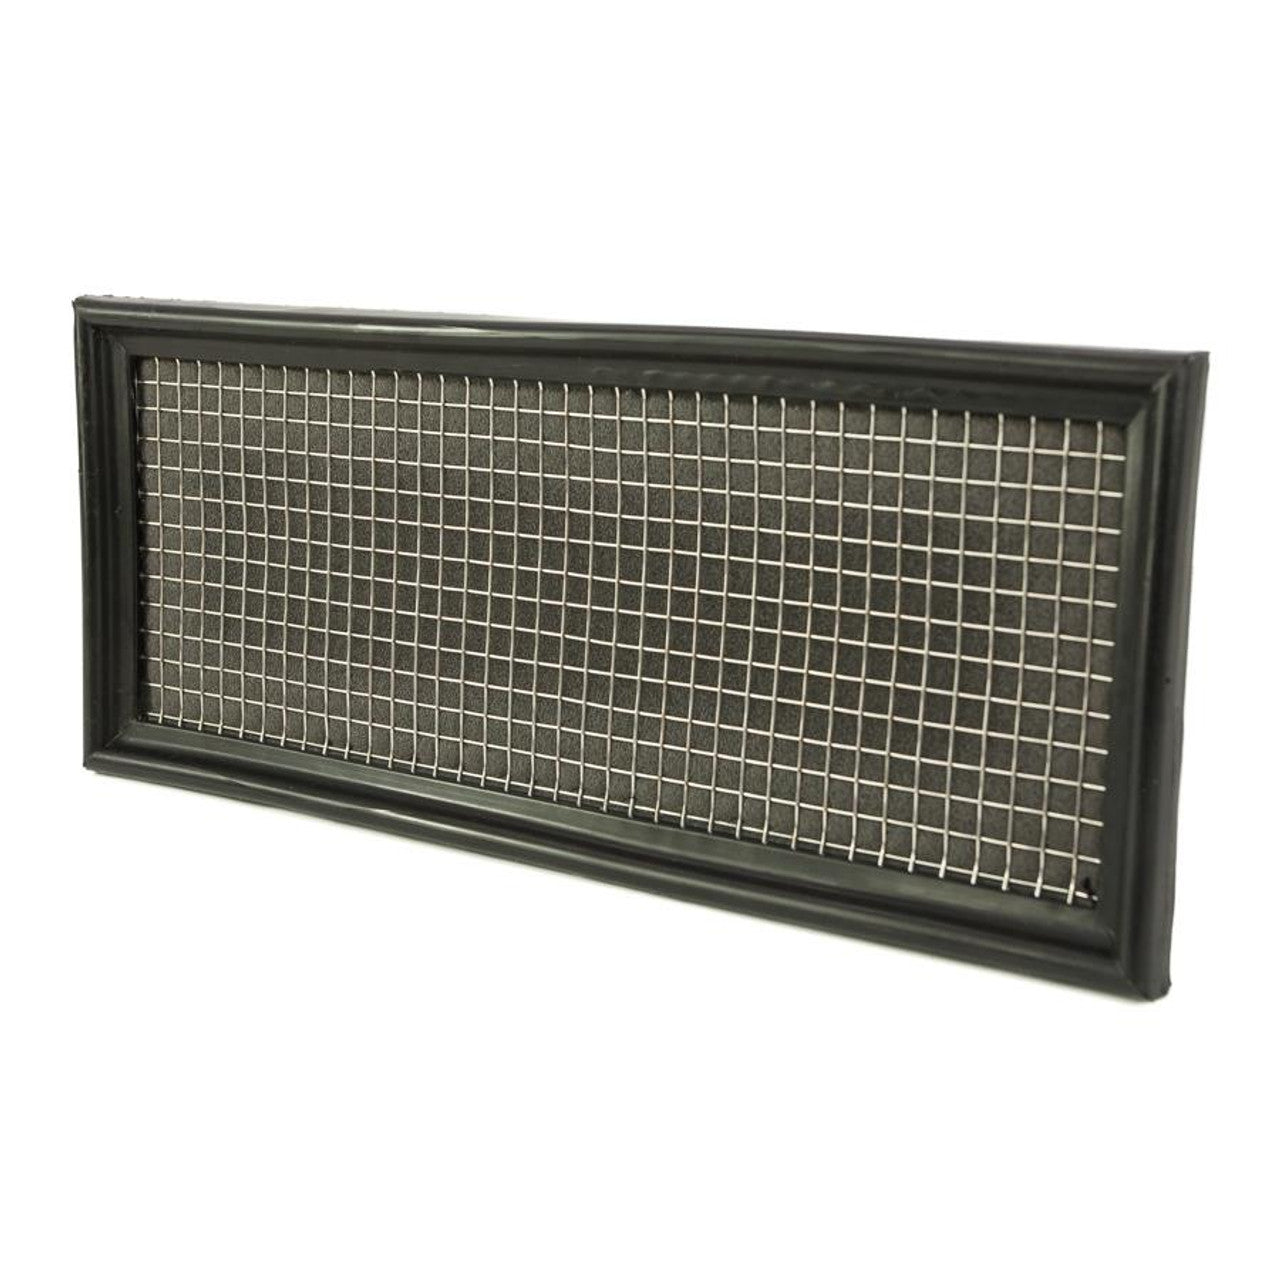 RamAir OE Replacement Foam Air Filter - Mitsubishi Colt 1.1-1.3-1.5 (04-12) & Smart ForFour 1.1-1.3-1.5 (04-06)